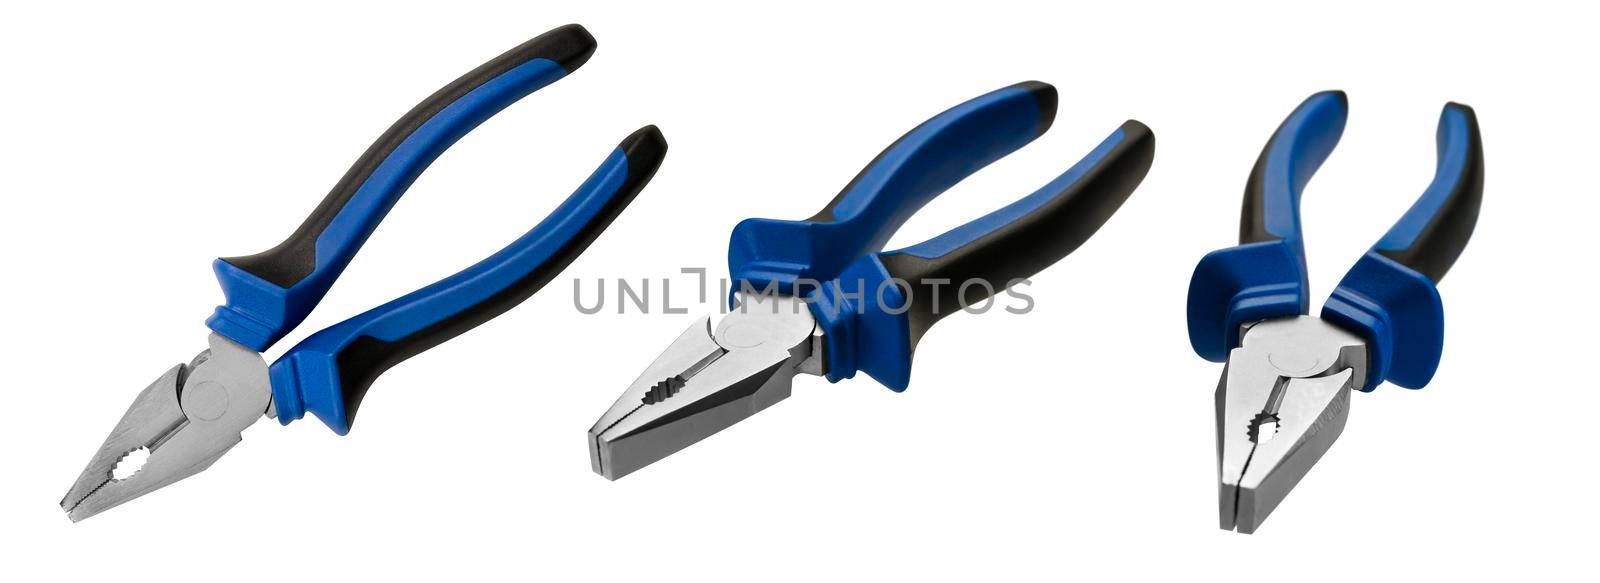 Pliers in different angles on a white background.